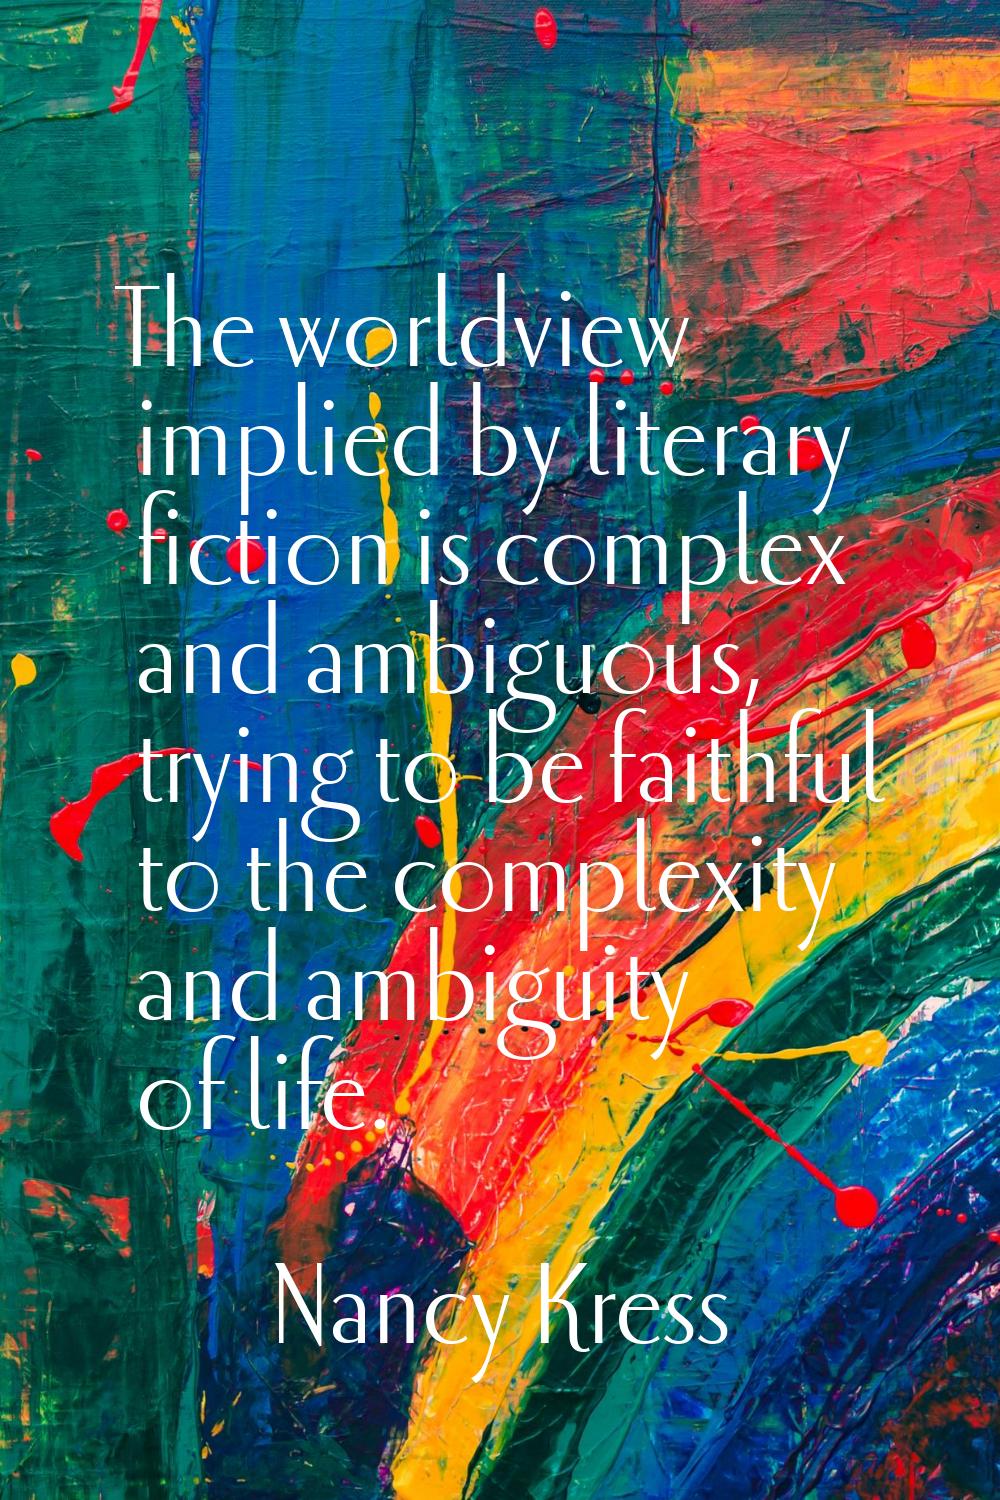 The worldview implied by literary fiction is complex and ambiguous, trying to be faithful to the co